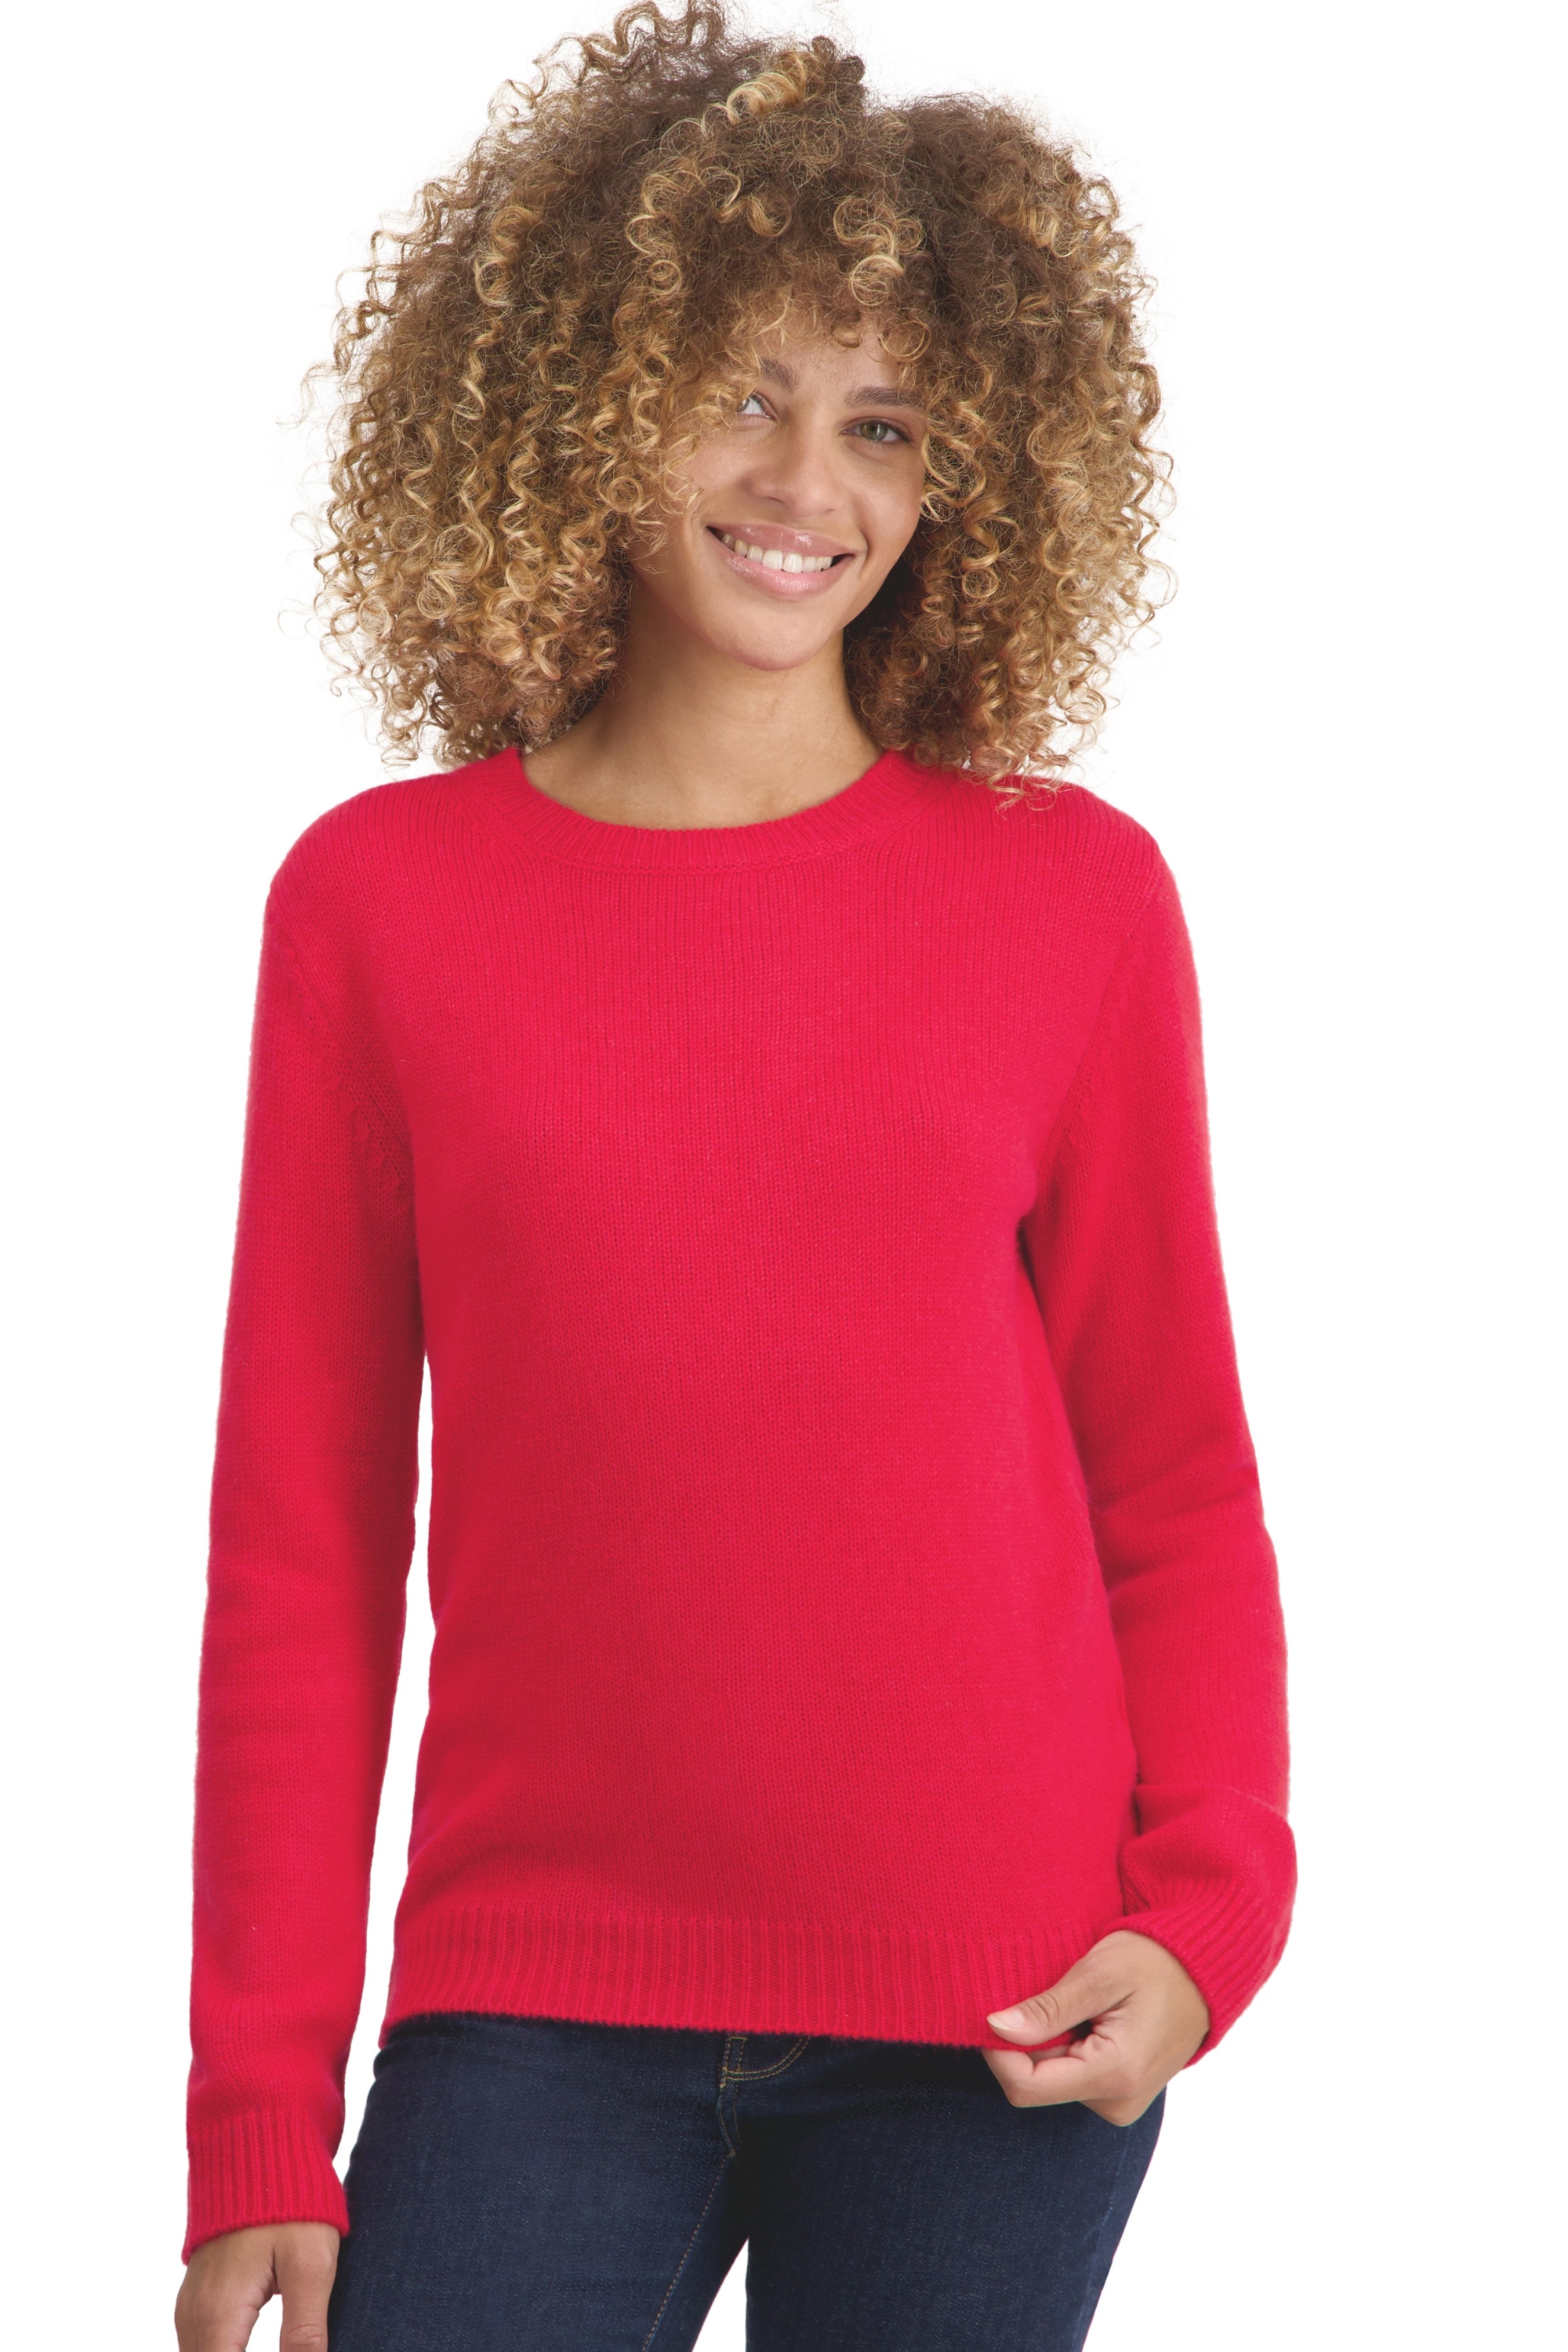 Cachemire pull femme tyrol rouge l